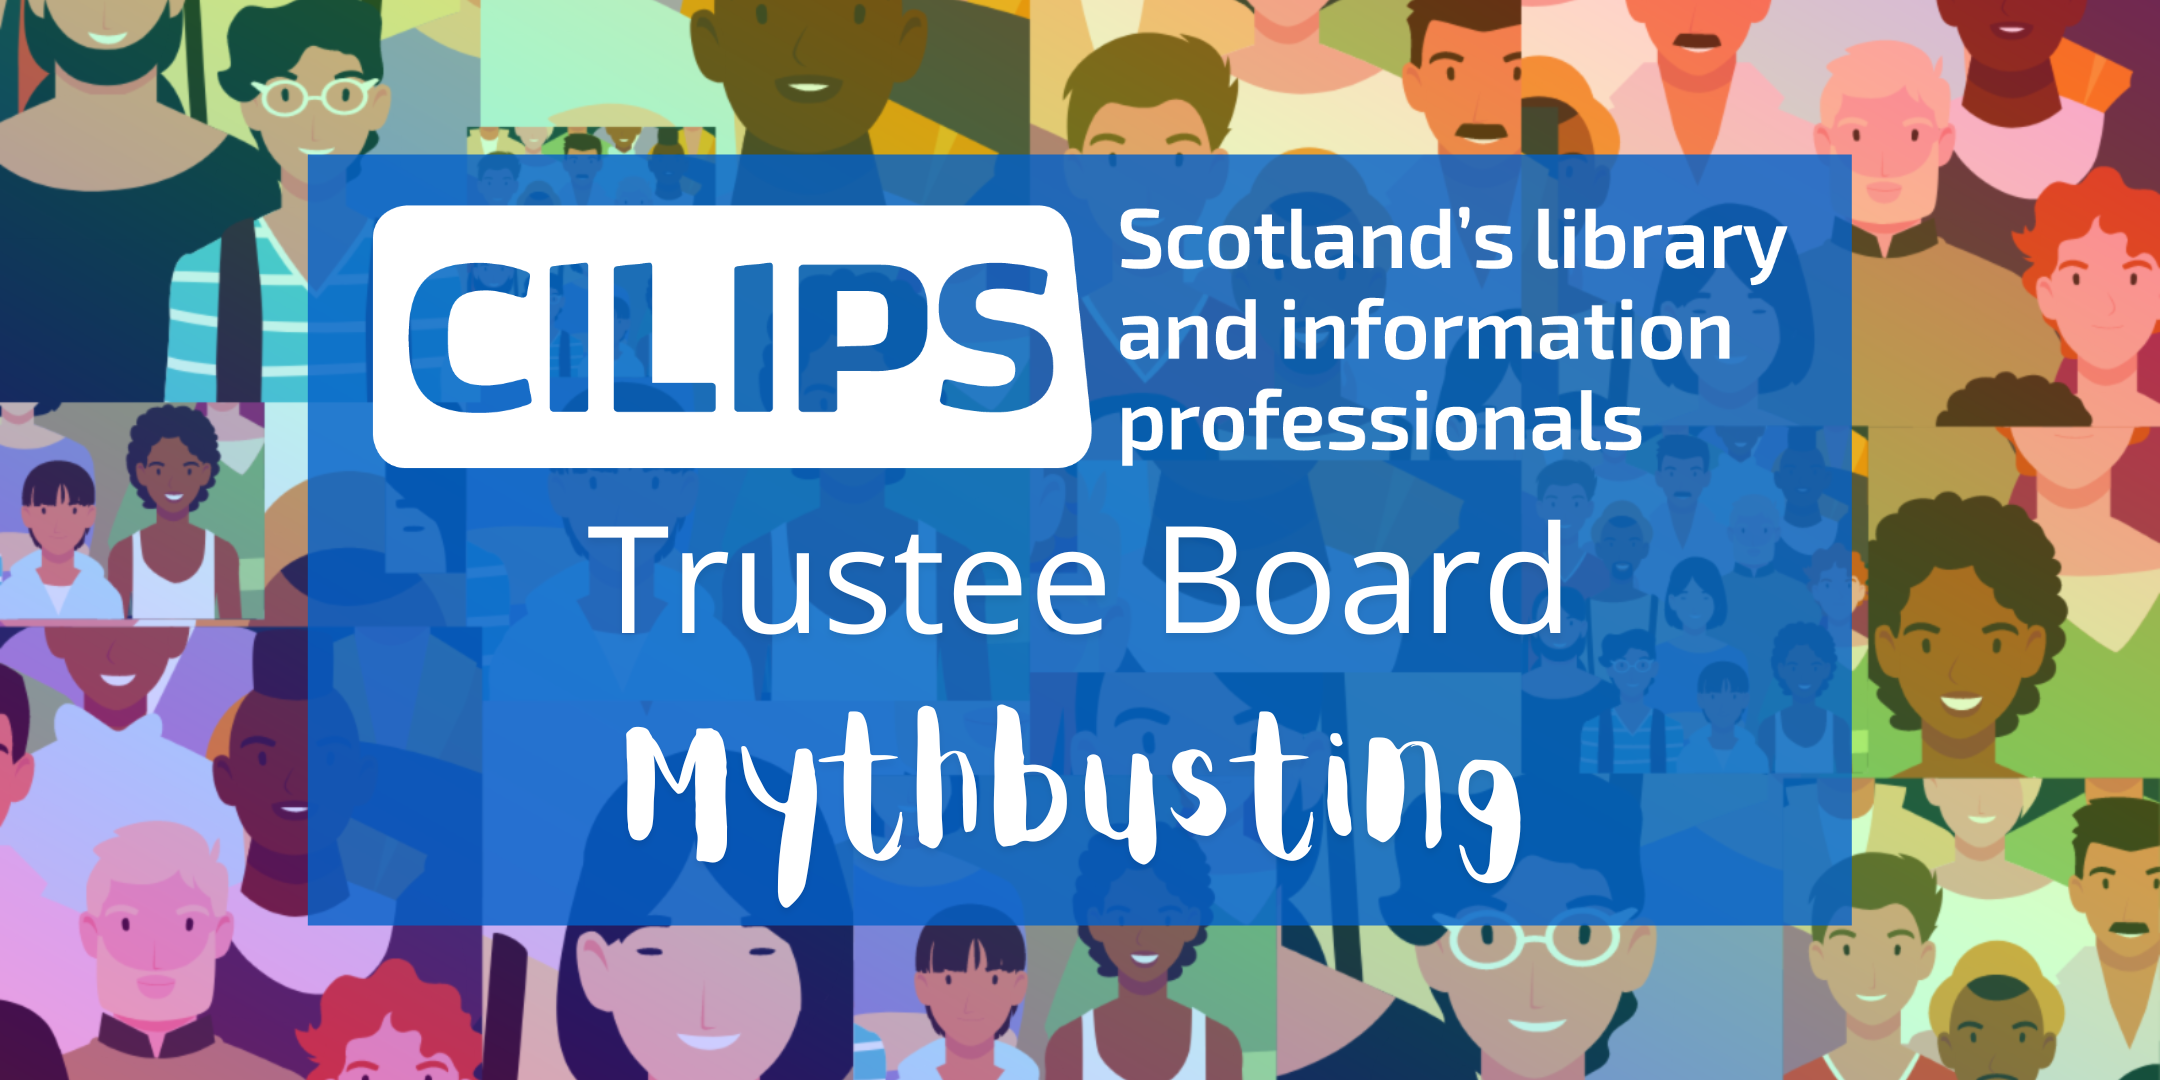 CILIPS Trustee Board Mythbusting, with white text in a blue rectangle and a background illustration showing a diverse crowd.